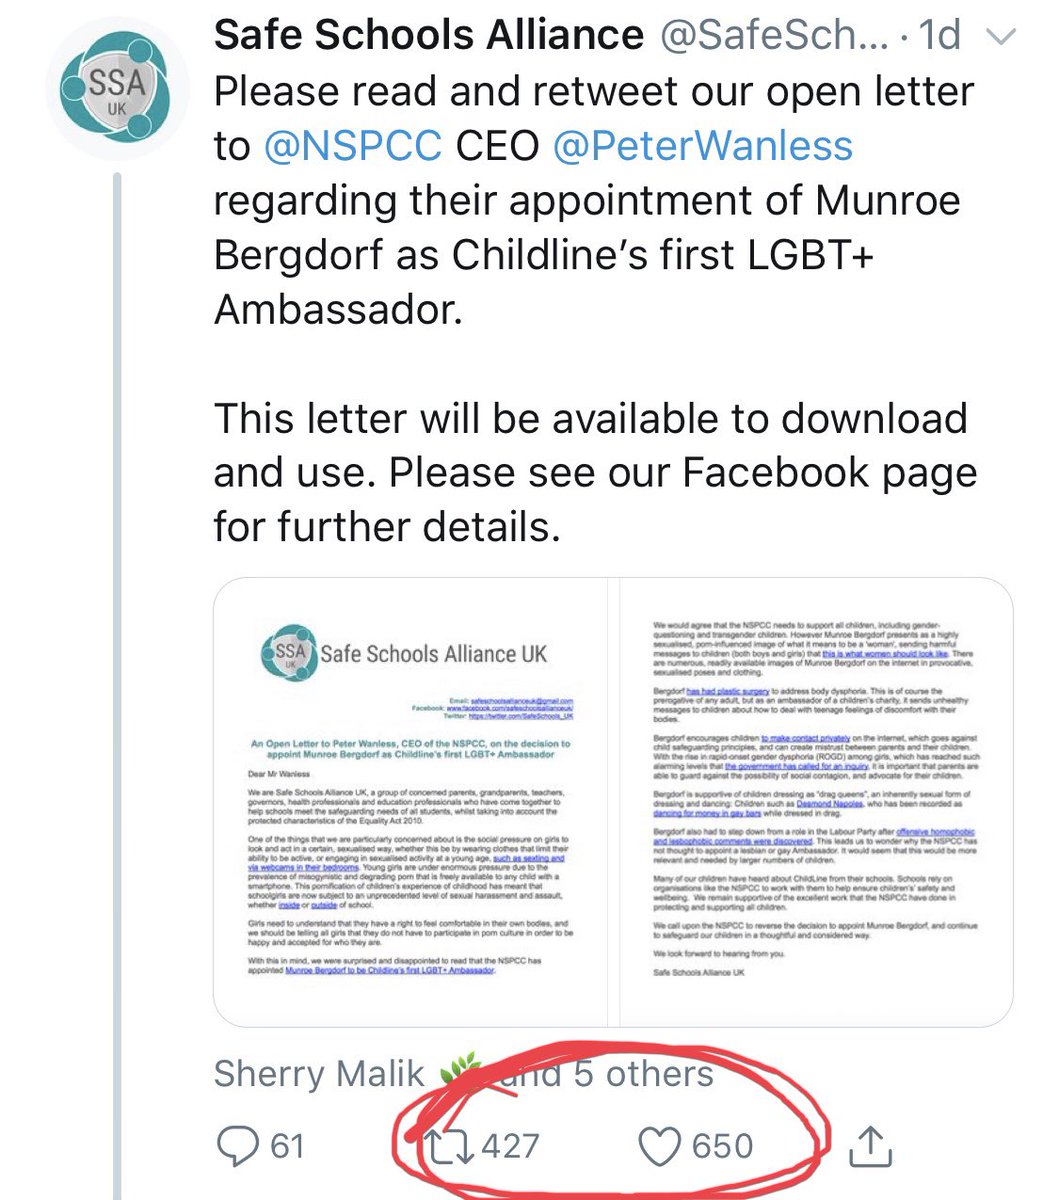 How did, what is effectively a (polished-up with photoshop and a logo) troll soc account get such traction, and how did it manage to sway an established charity like the  @NSPCC and its CEO  @PeterWanless?